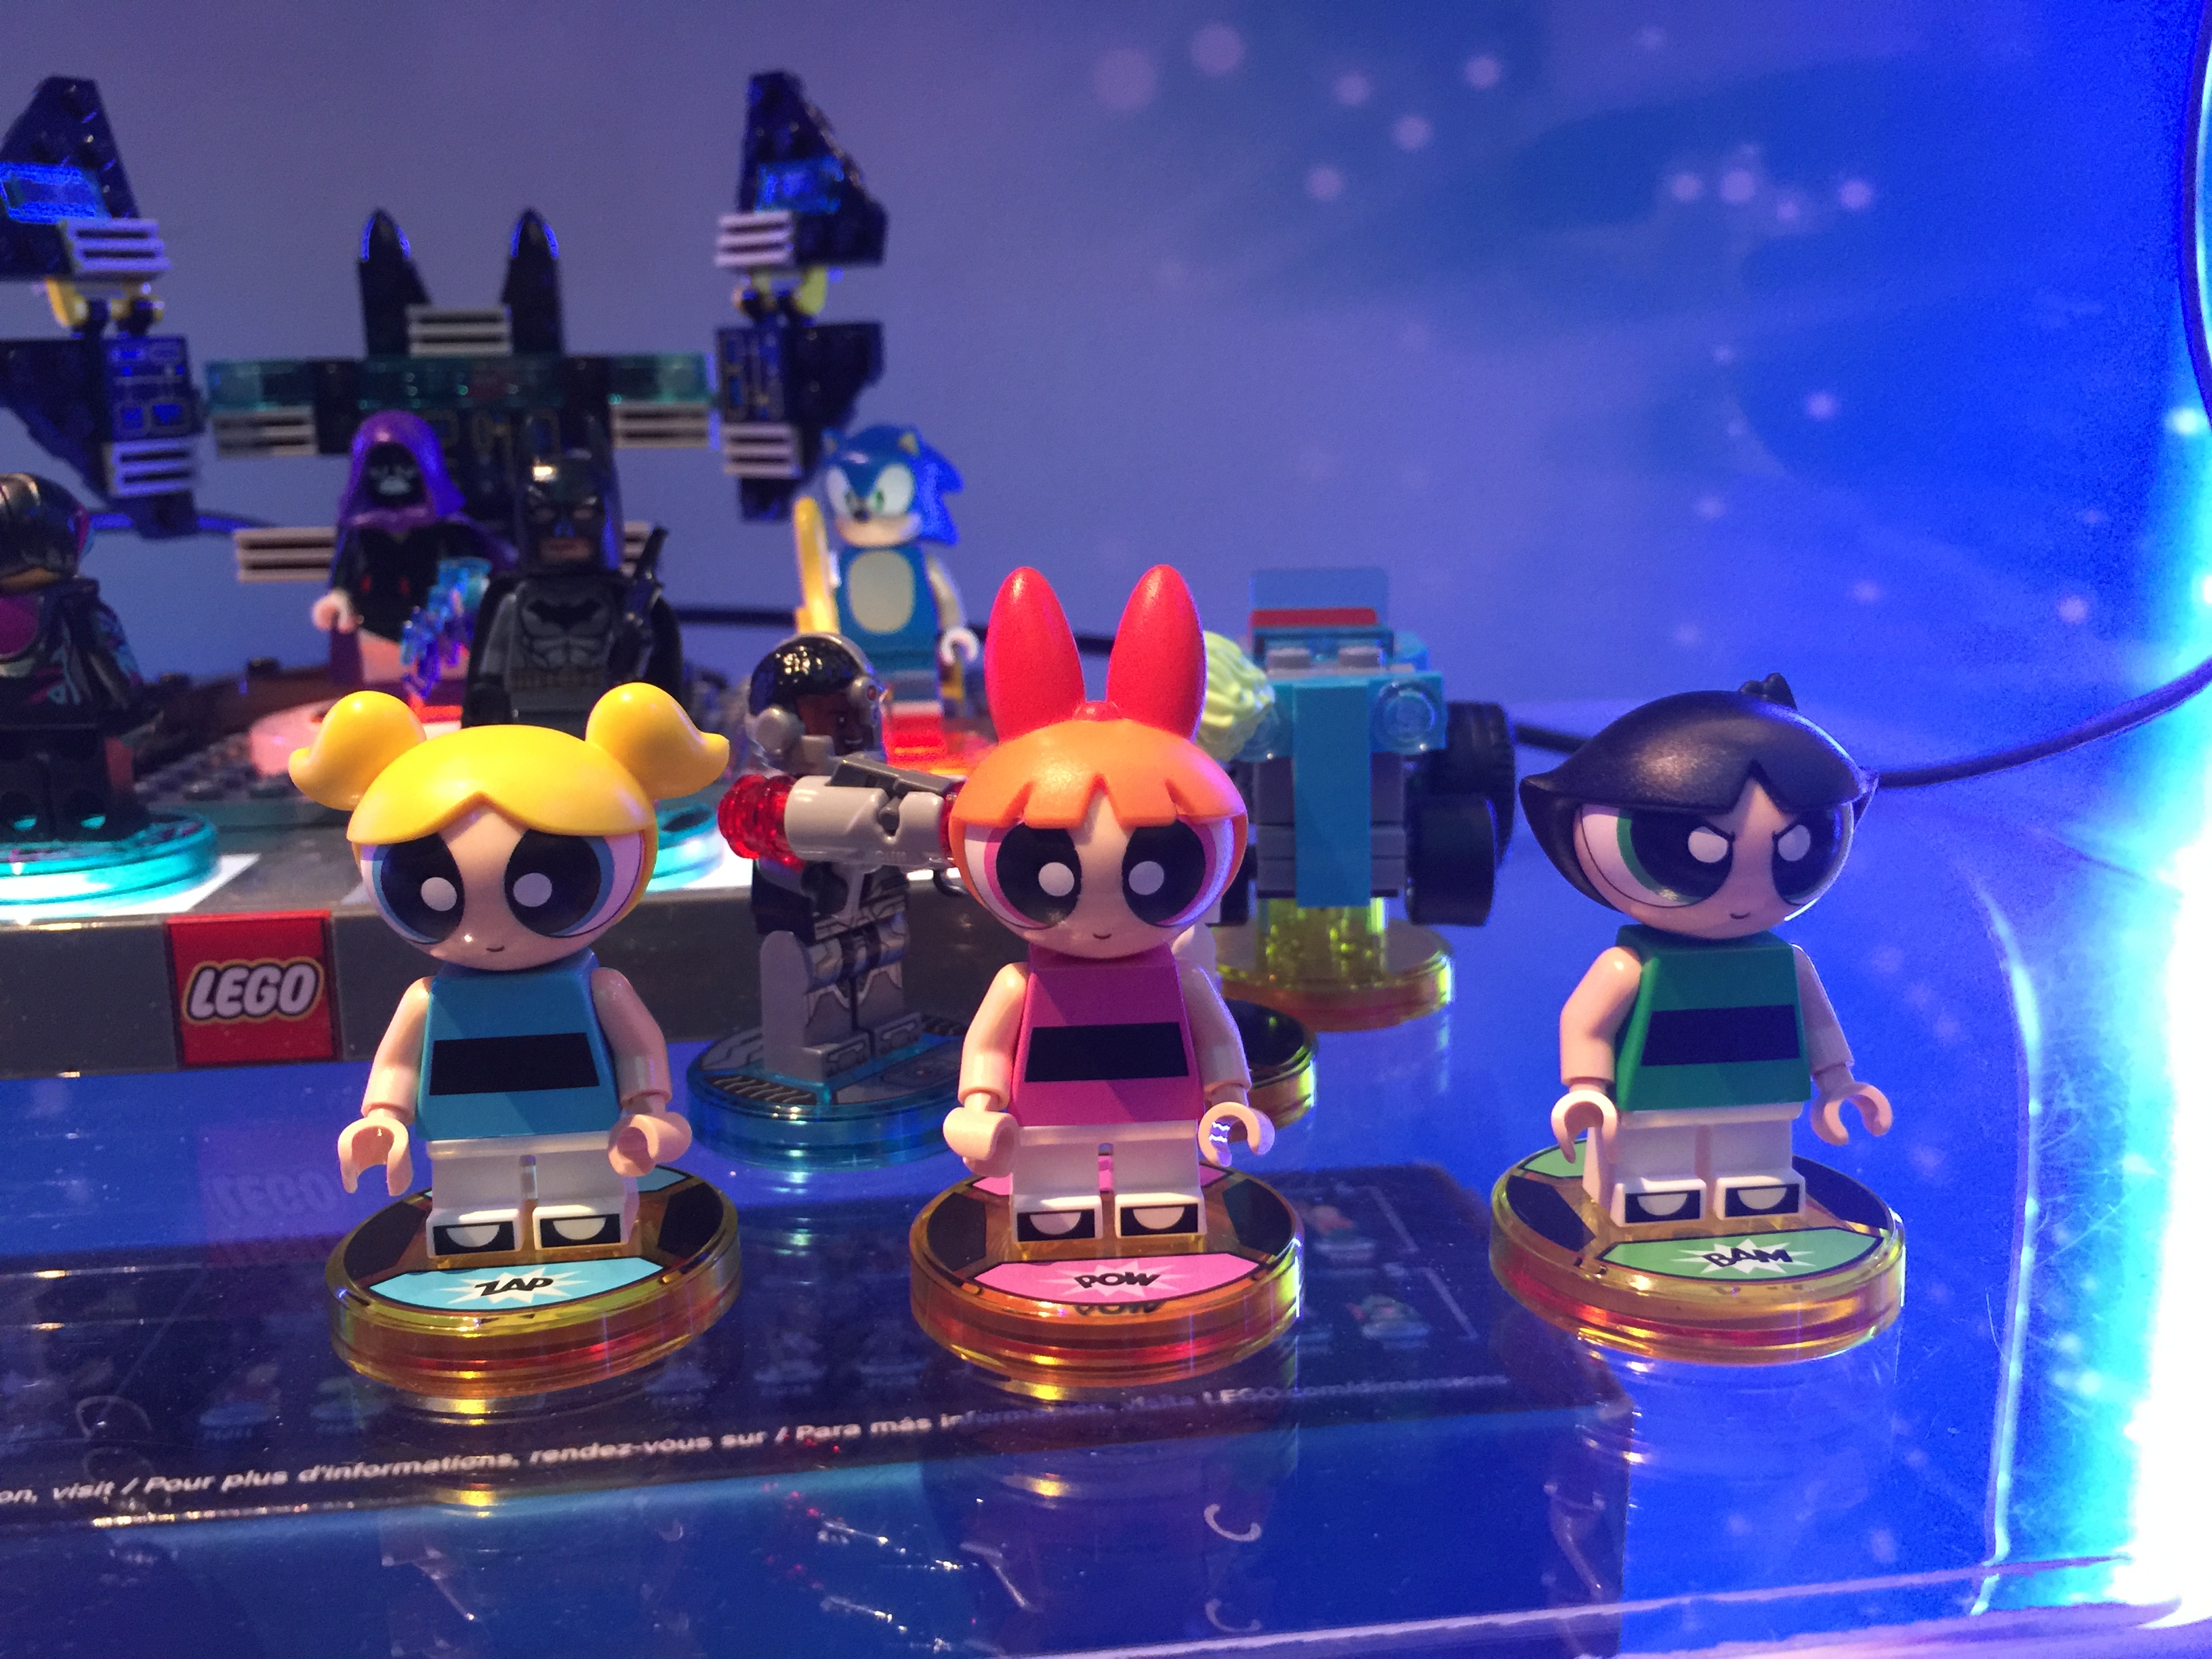 E3] LEGO Dimensions Is Dead, But Enjoy These of The Upcoming Powerpuff Girls Minifigs - FBTB